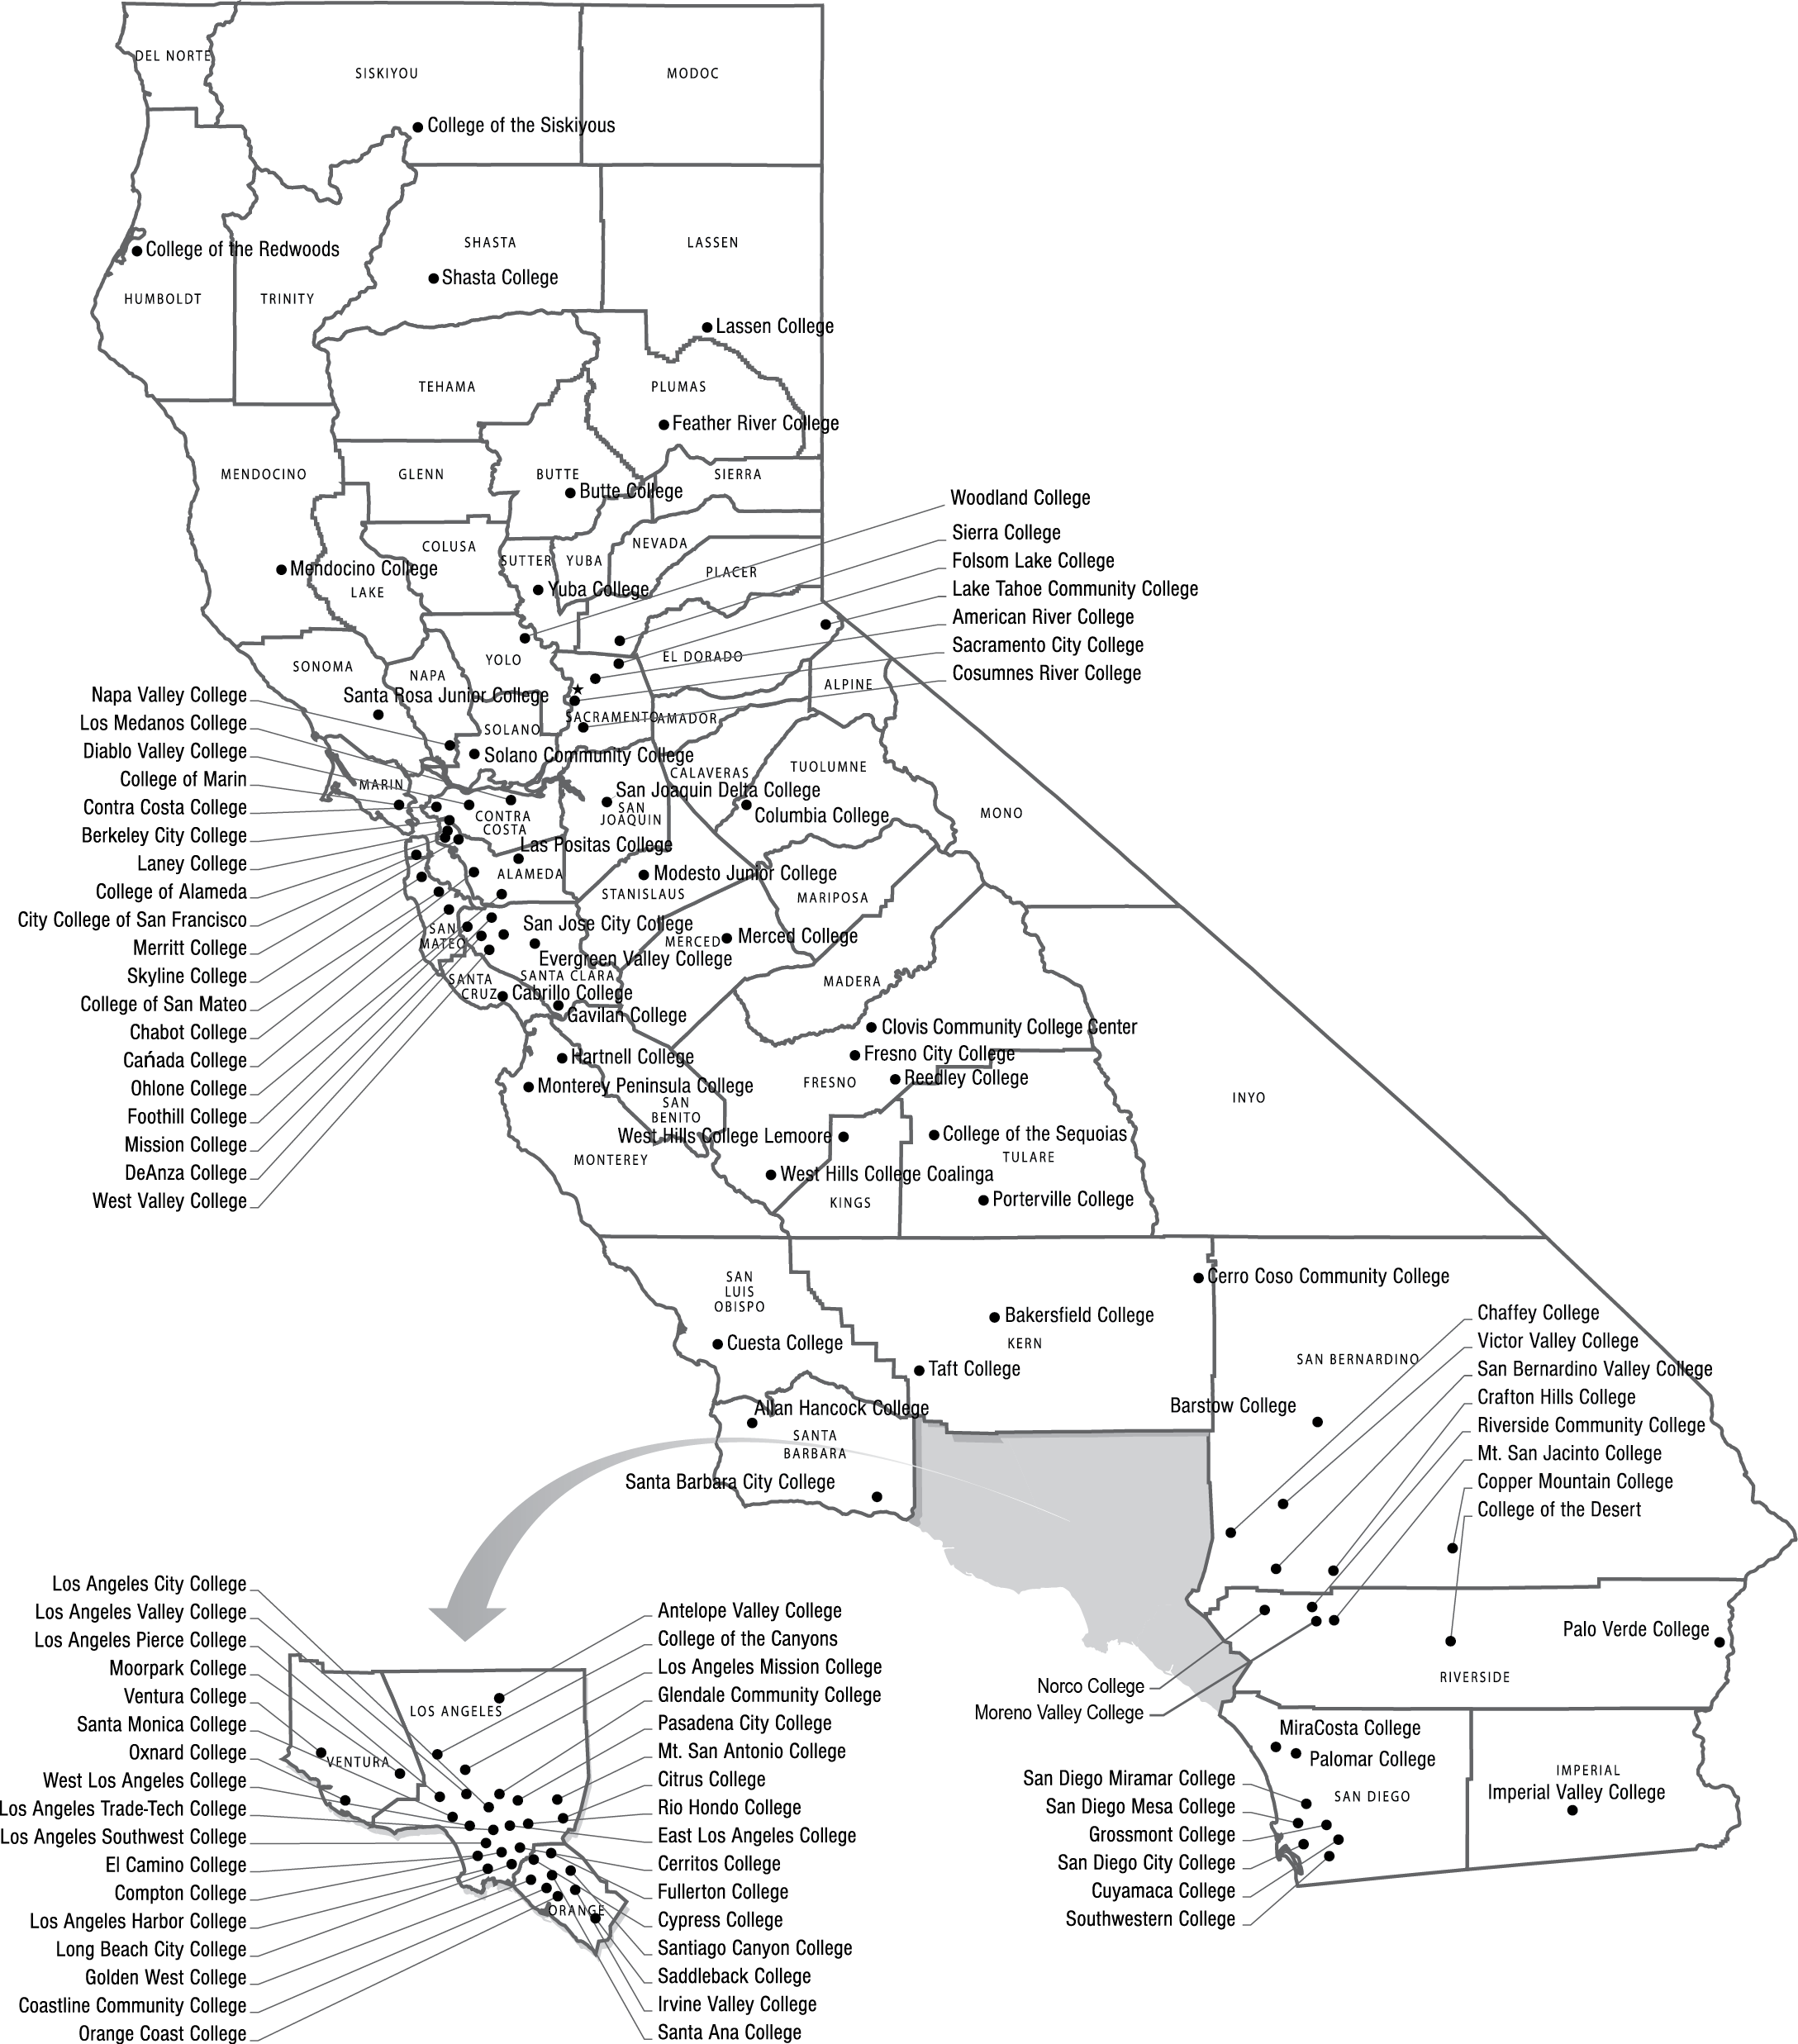 State map showing the 114 California community colleges.